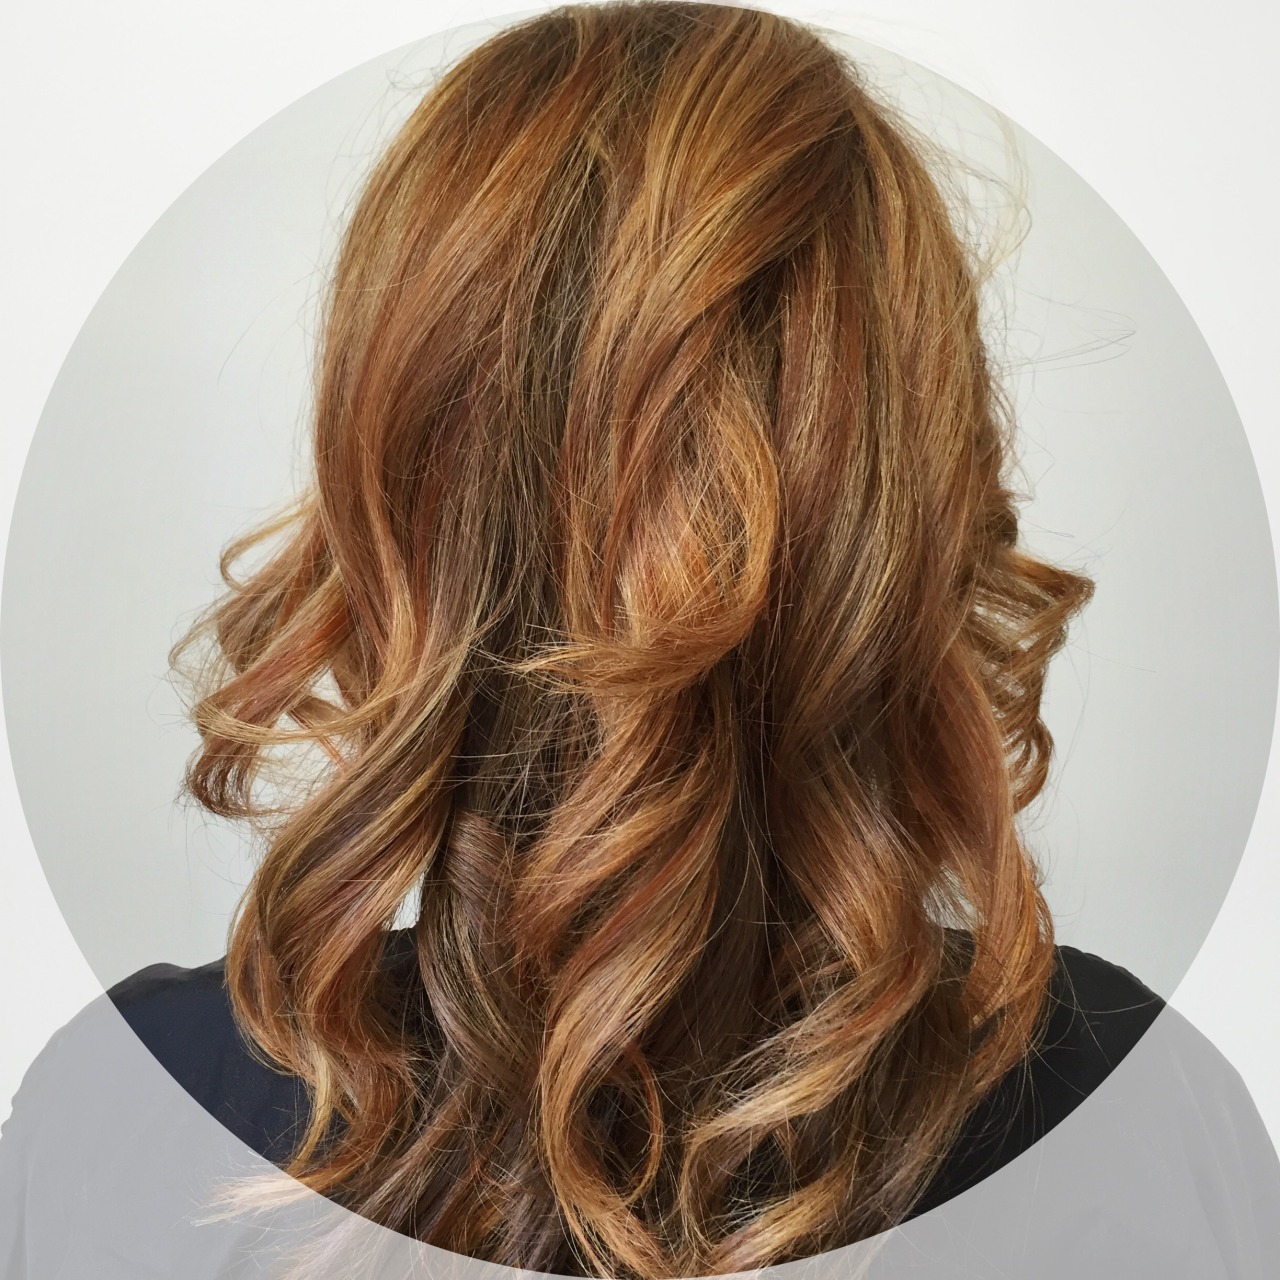 Hair by Rachel Dillon — Golden blonde highlights and copper red lowlights.